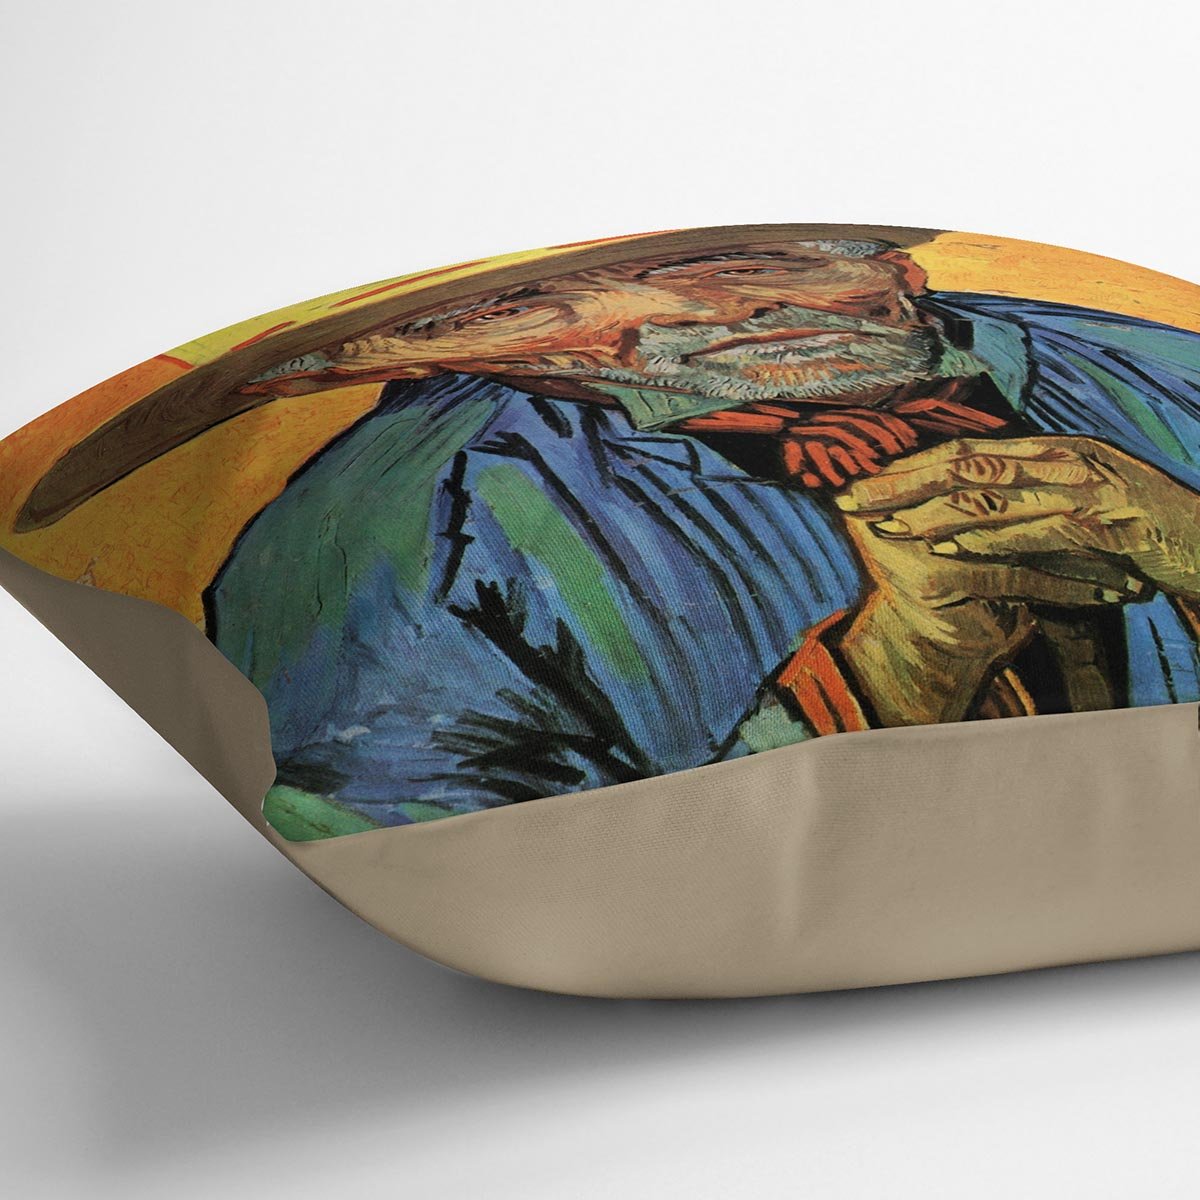 Portrait of Patience Escalier by Van Gogh Throw Pillow